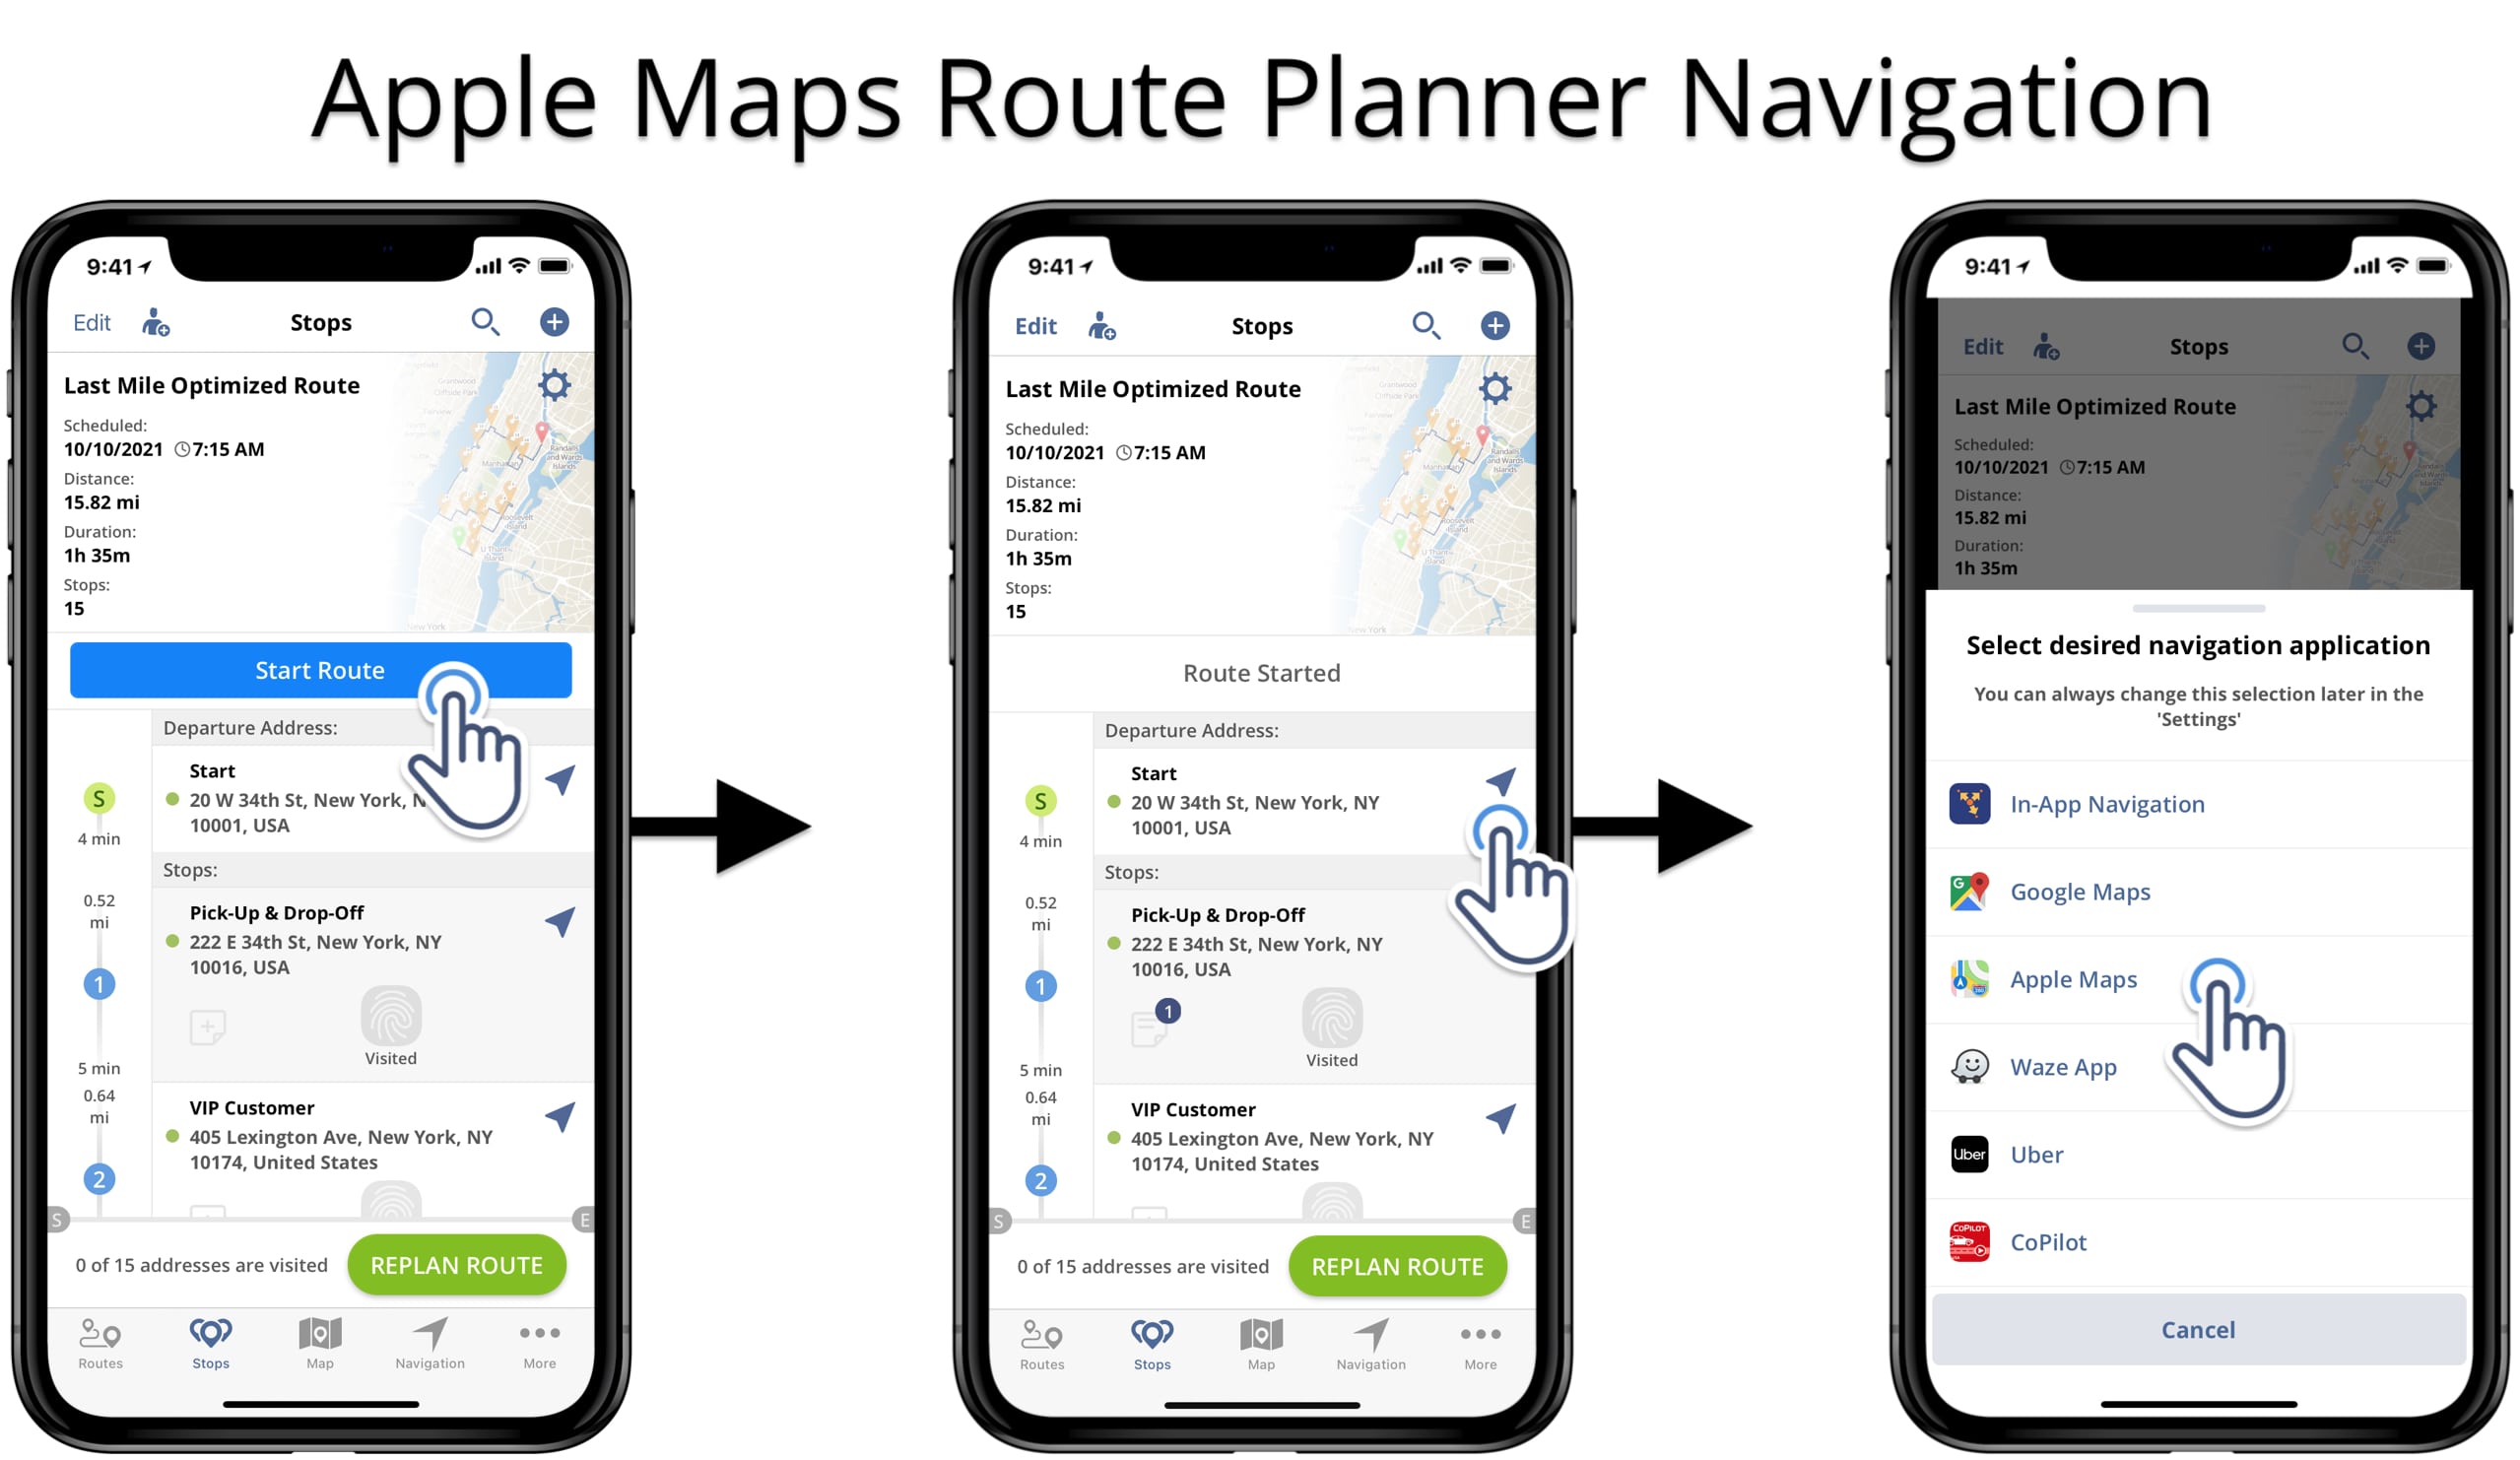 Use Apple Maps to navigate routes planned on the Route4Me iOS Route Planner app.